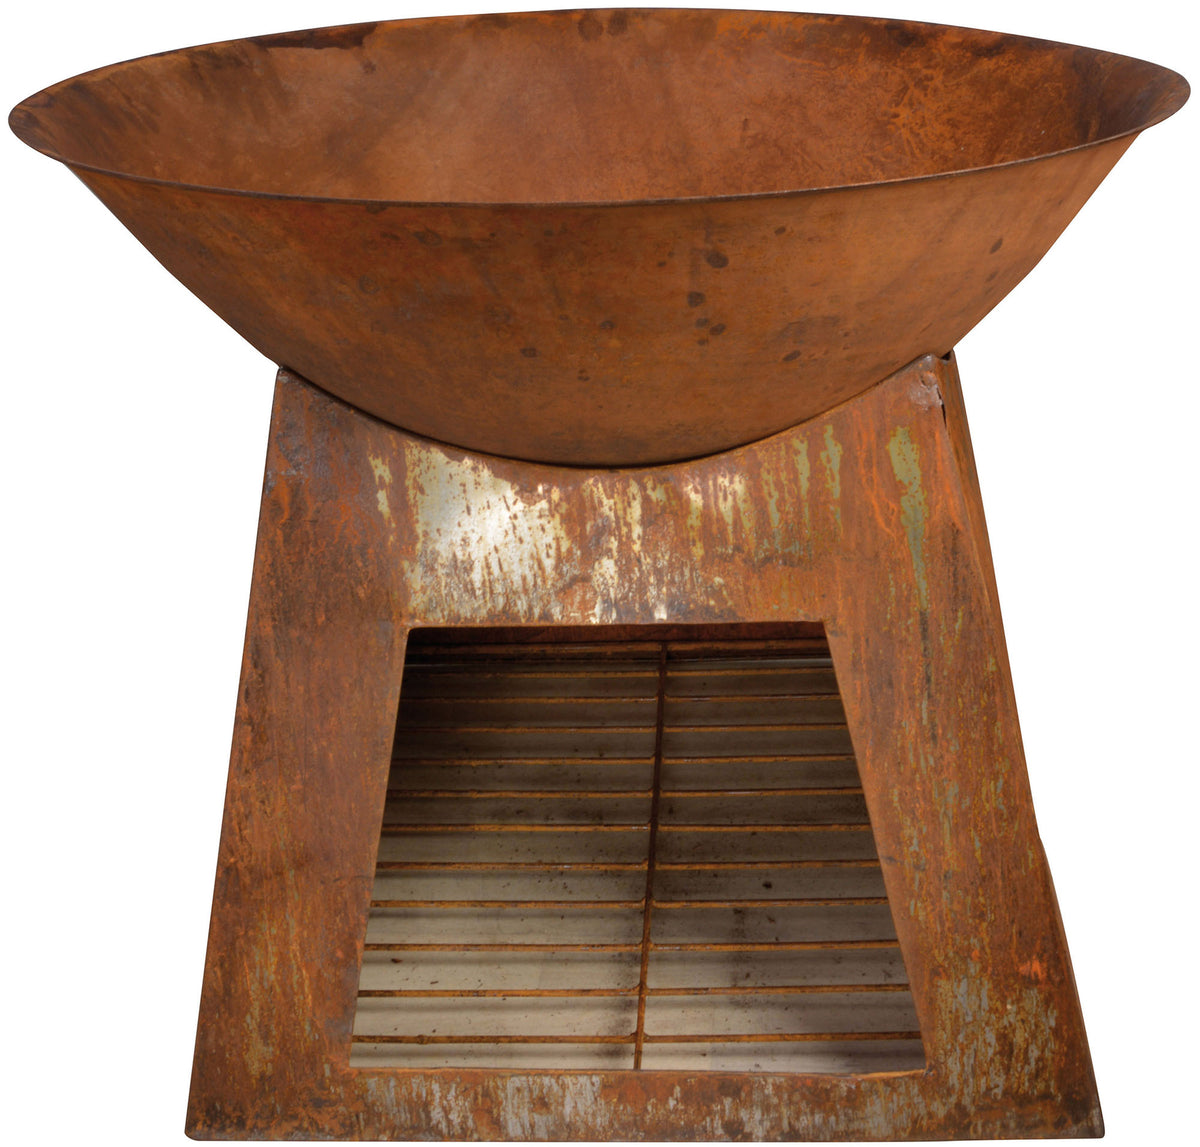 RUST EFFECT FIRE PIT WITH UNDERNEATH WOOD STORAGE